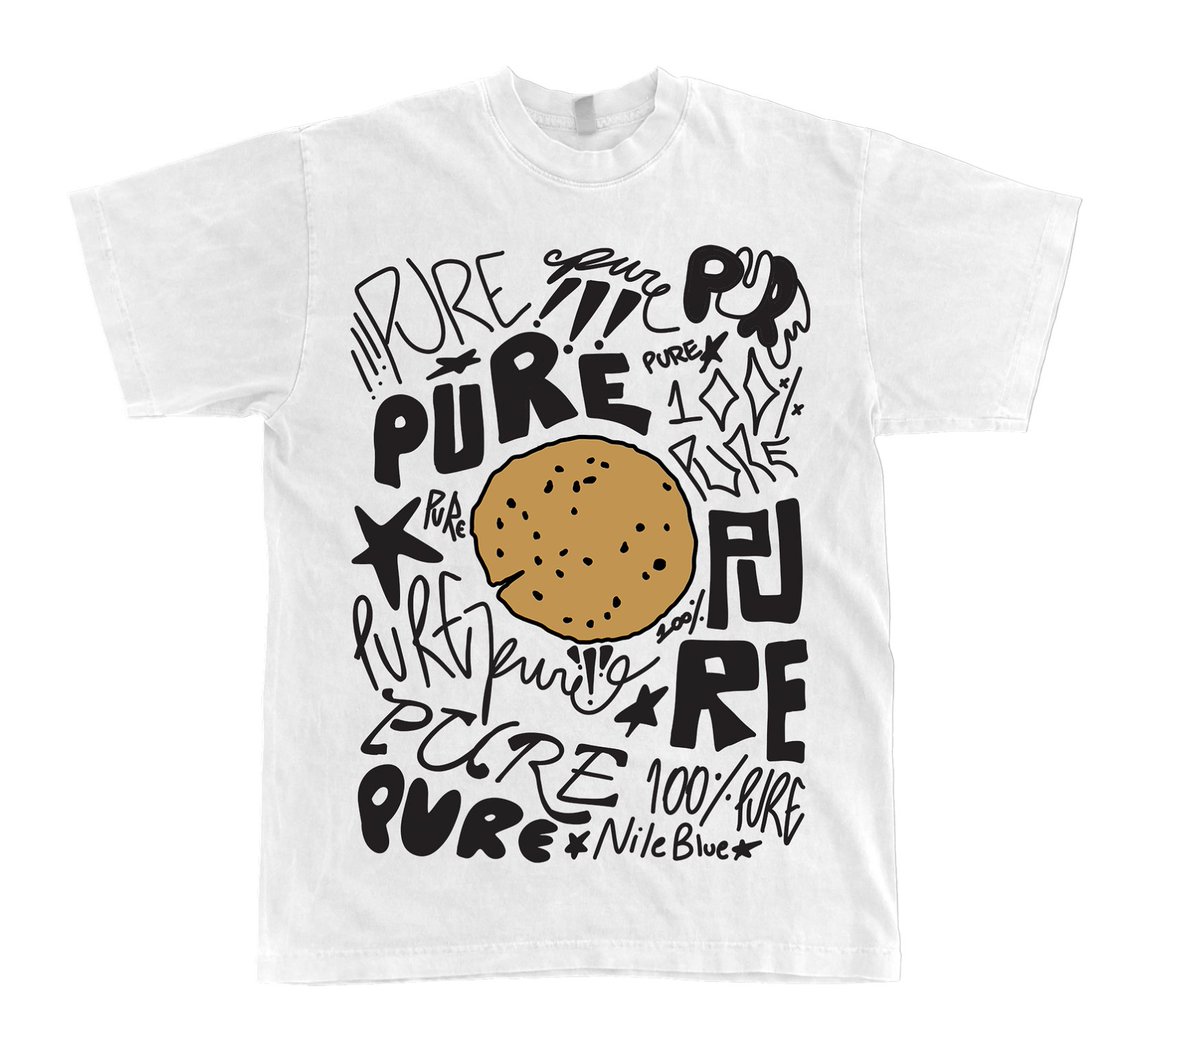 A few weeks ago I made the world's purest cookie, and to commemorate it, I also made this t-shirt. If you like it, you only have until this Friday to pick one up, then it's gone! thepurestcookie.com